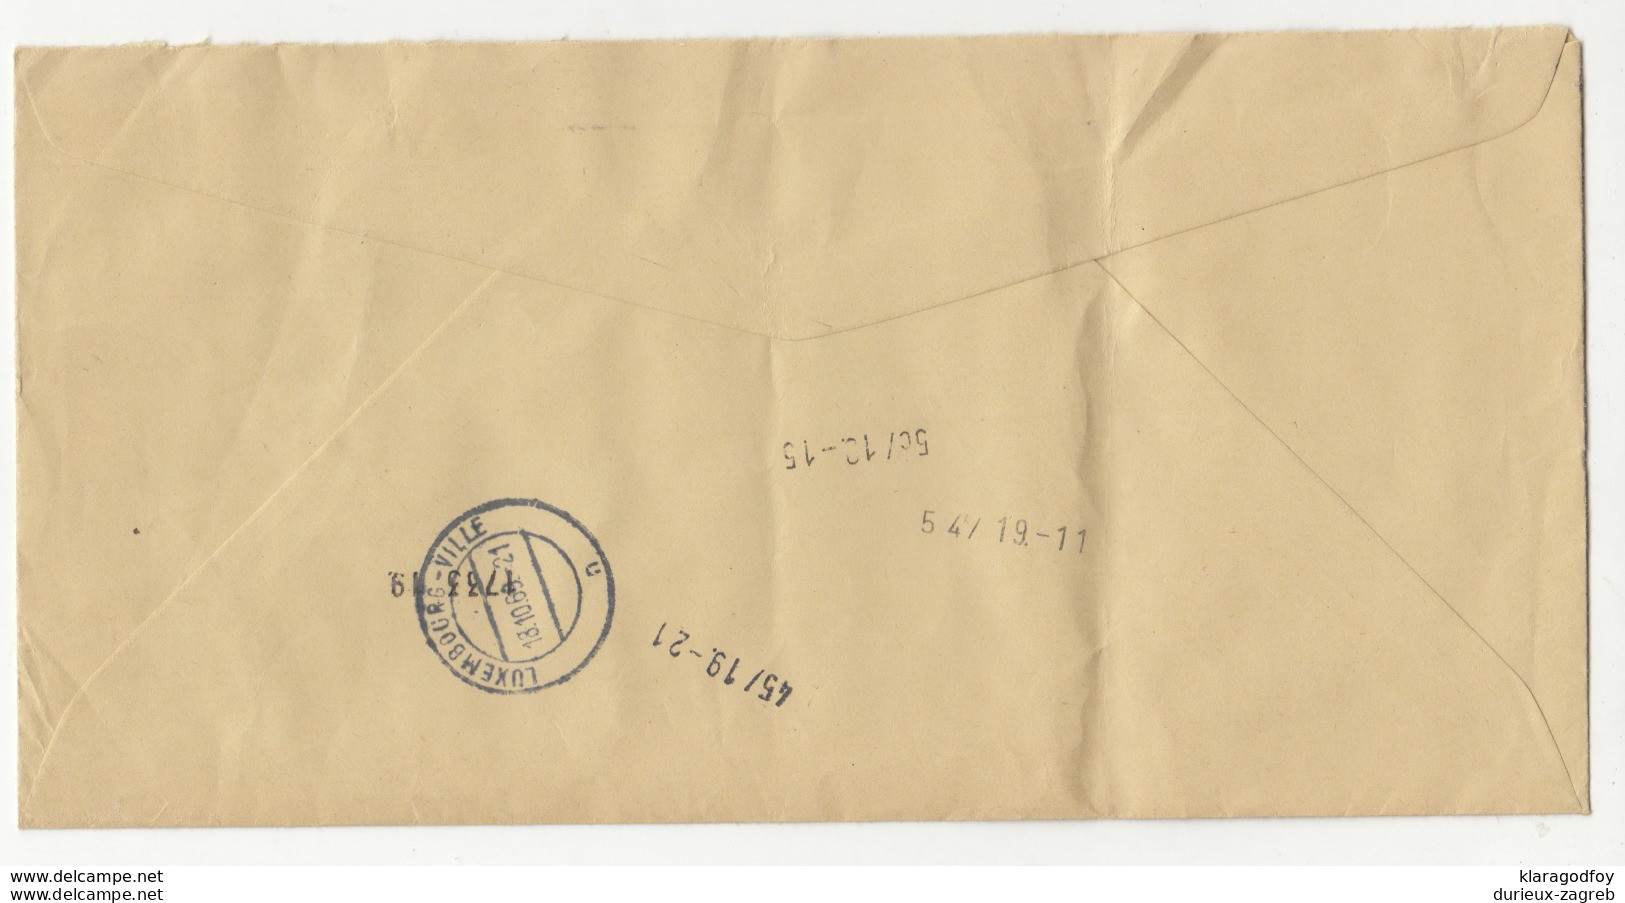 Electro Lingen Company Letter Cover Travelled Express 1969 To Germany B190922 - Covers & Documents